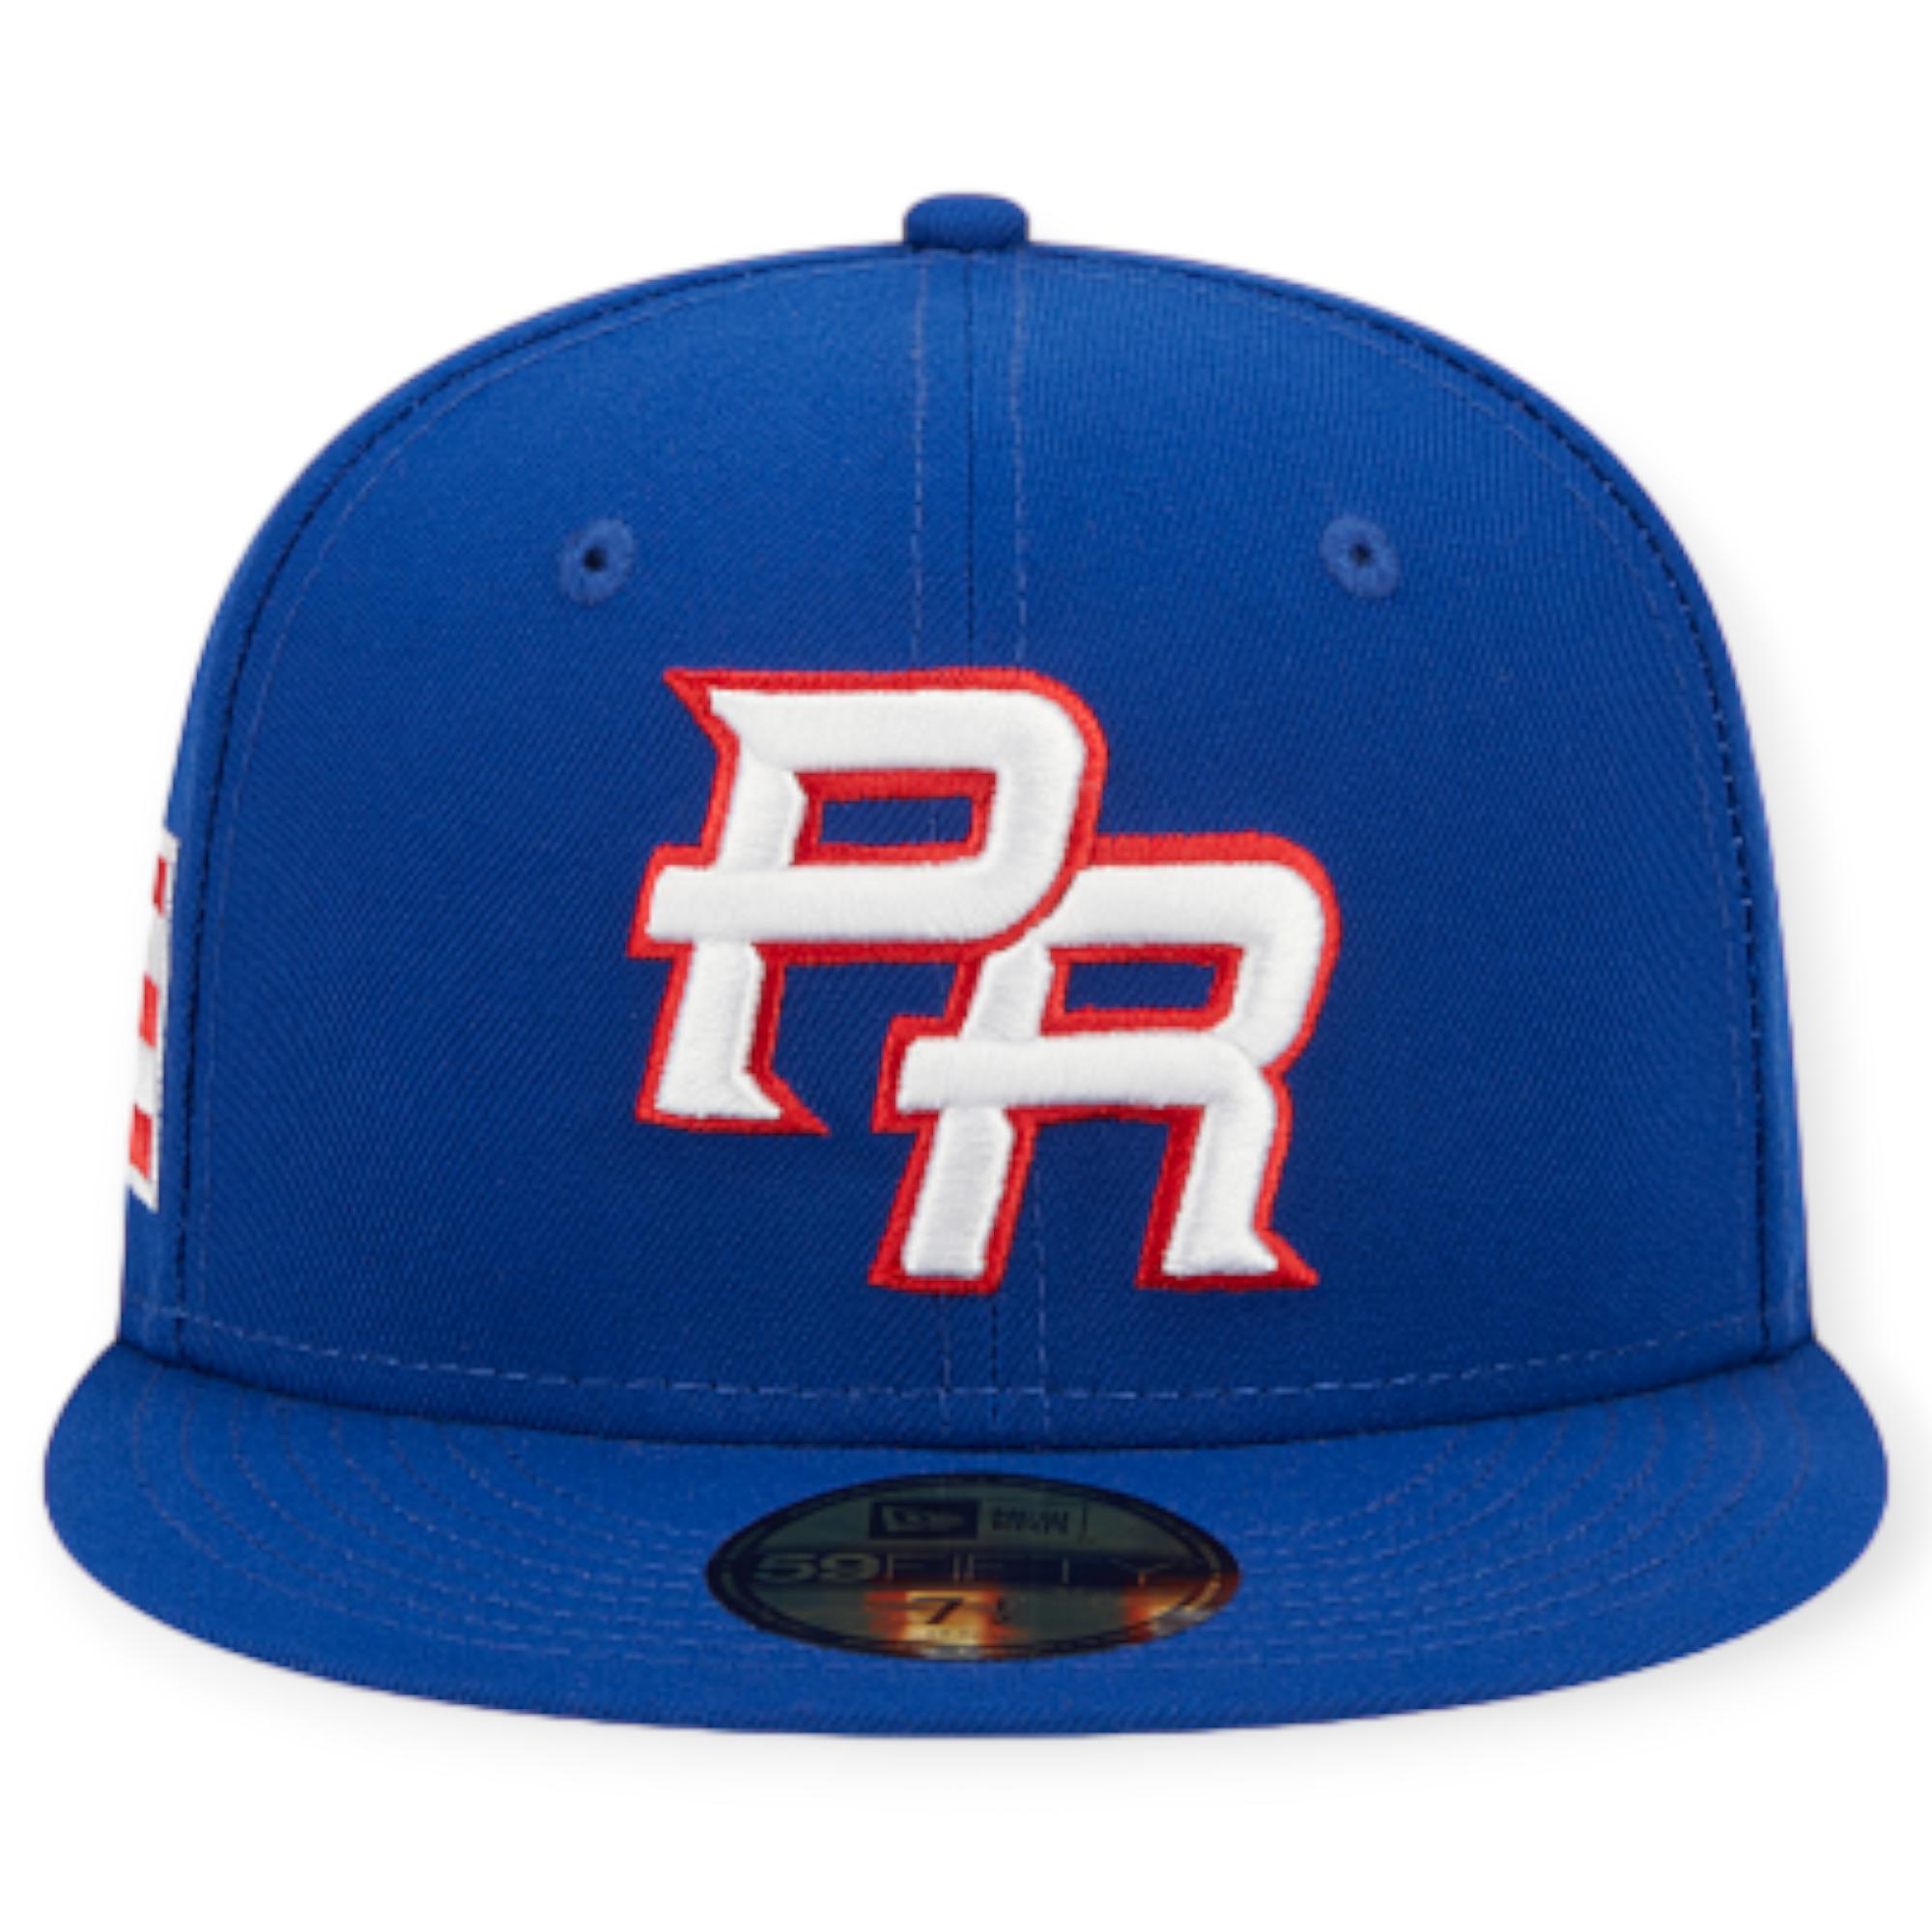 New Era Puerto Rico World Baseball Classic 59FIFTY Fitted Hat (Blue) 2